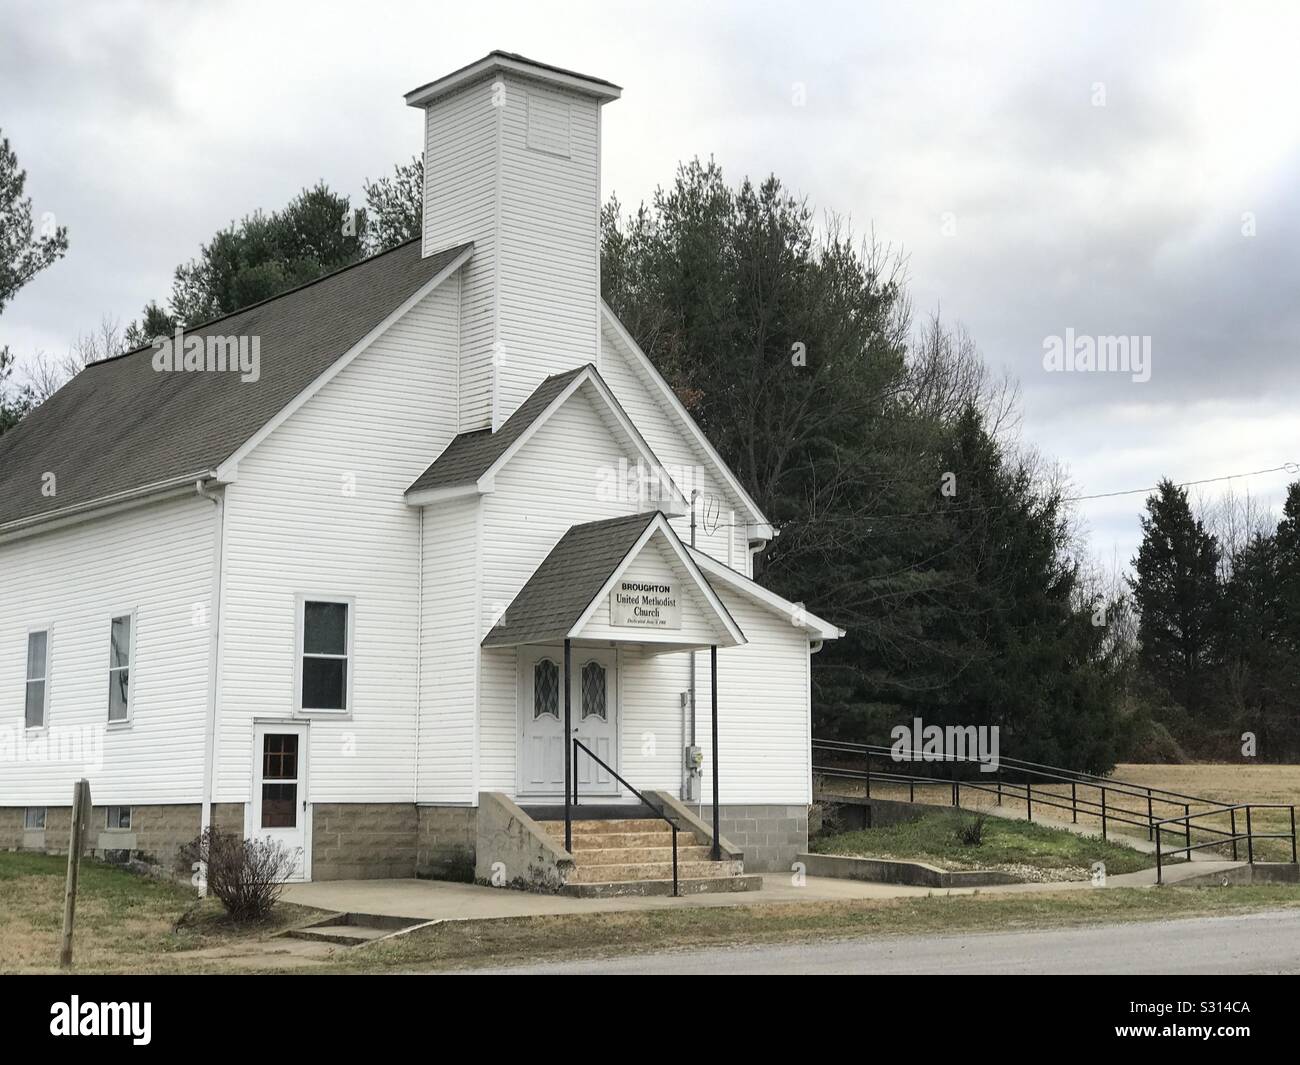 Small church in a small town in the middle of no where. Methodist church in Broughton, Illinois Stock Photo